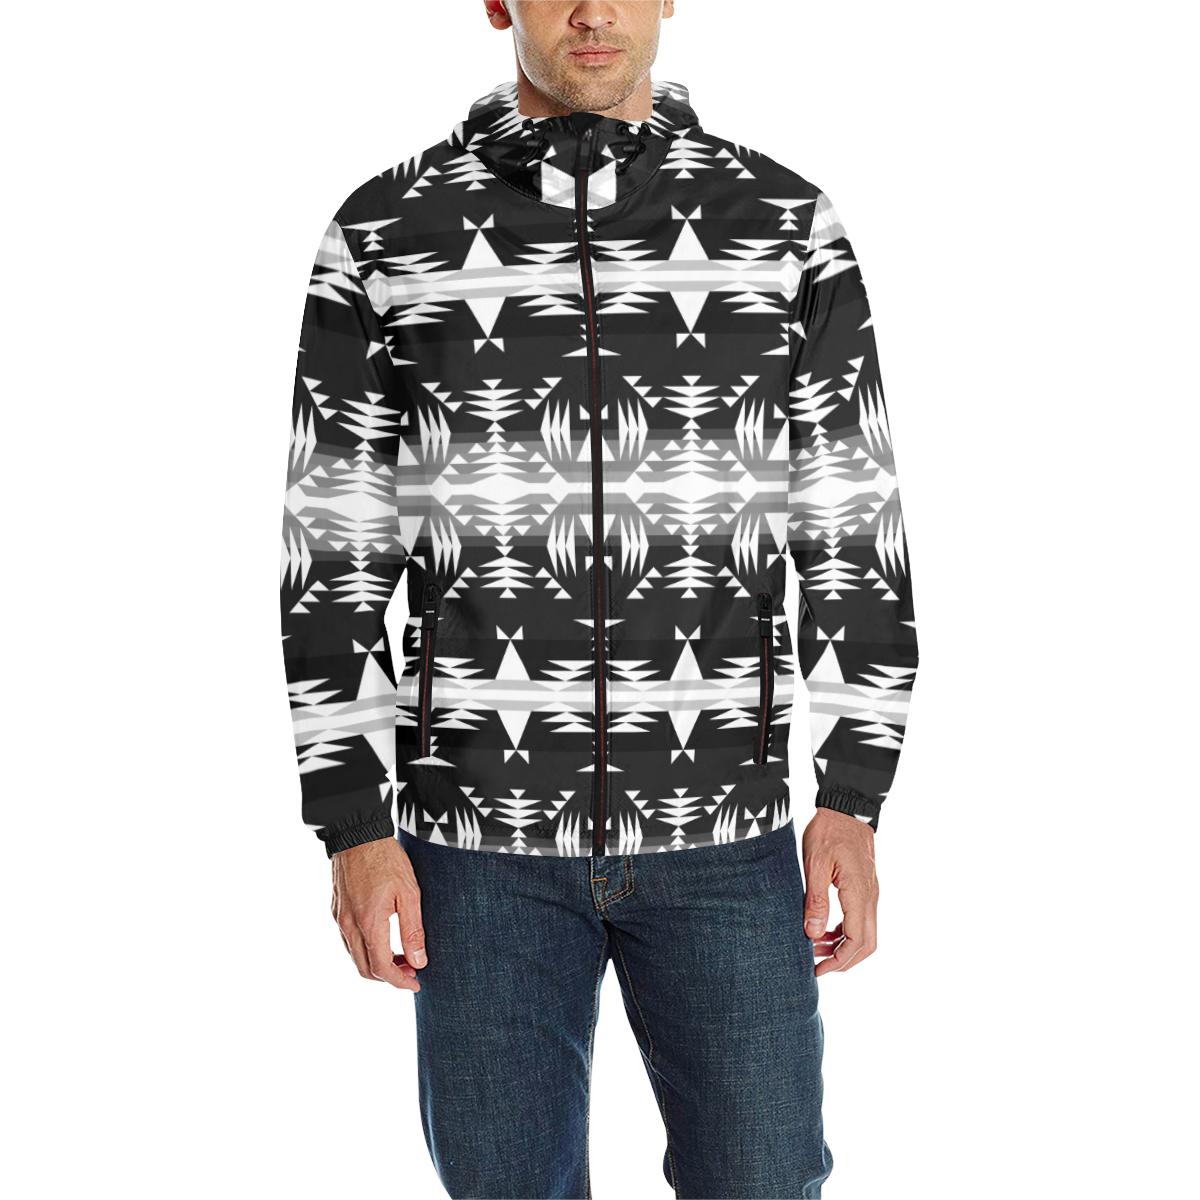 Between the Mountains Black and White Unisex Quilted Coat All Over Print Quilted Windbreaker for Men (H35) e-joyer 